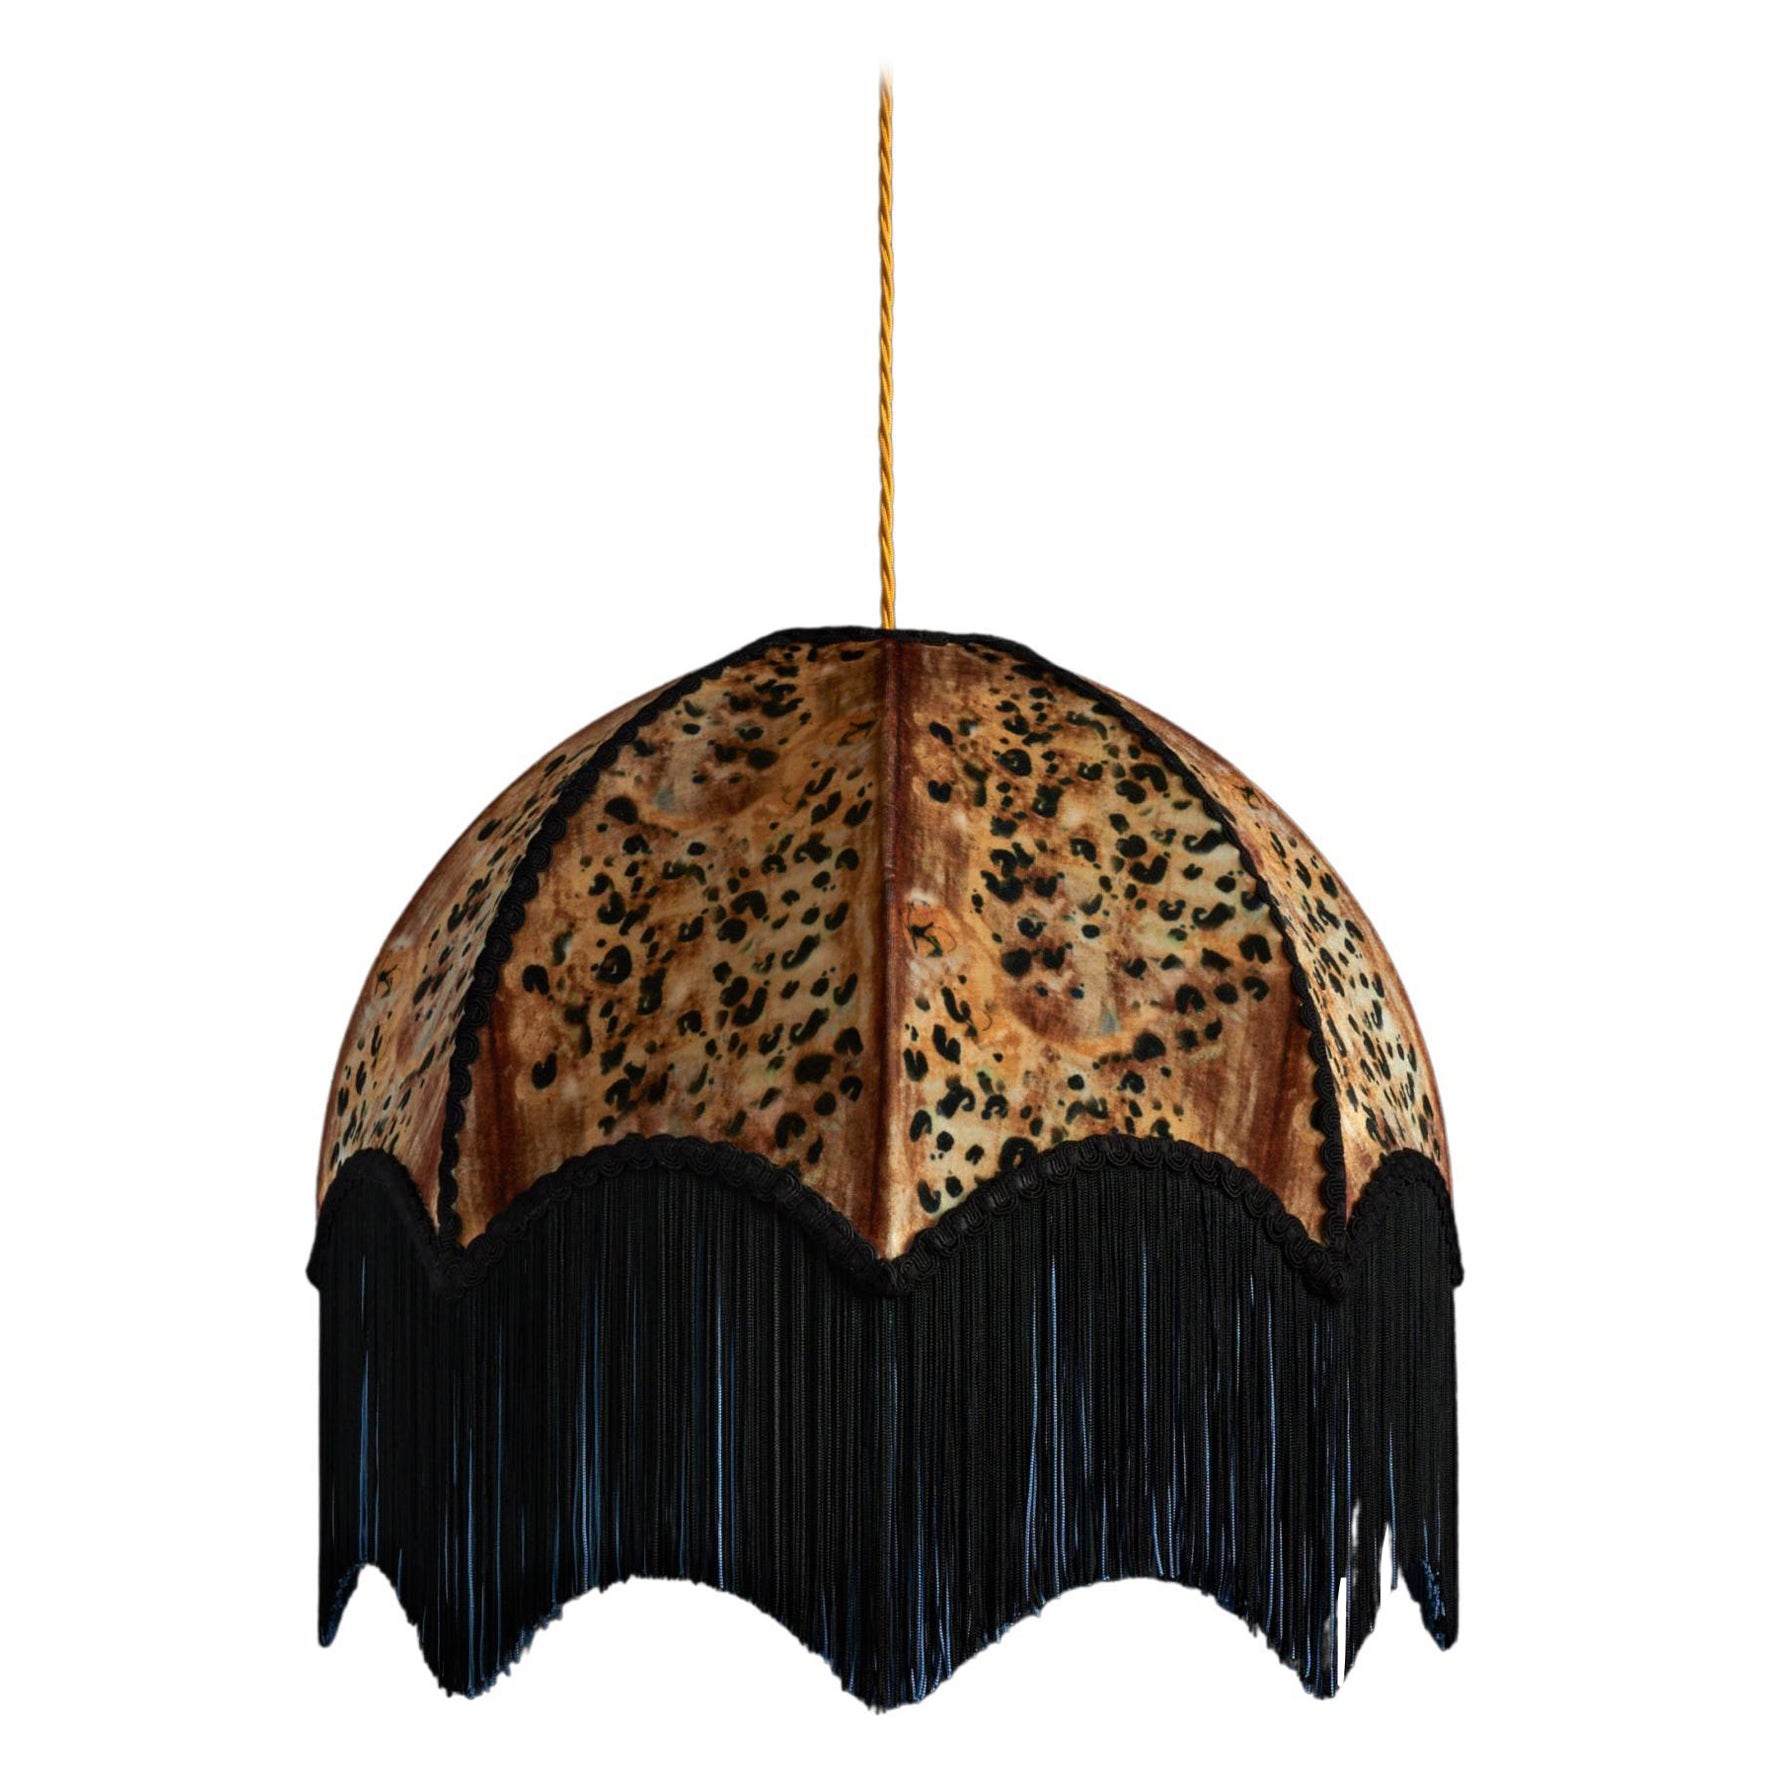 Savannah Lampshade with Fringing - Large (18") For Sale